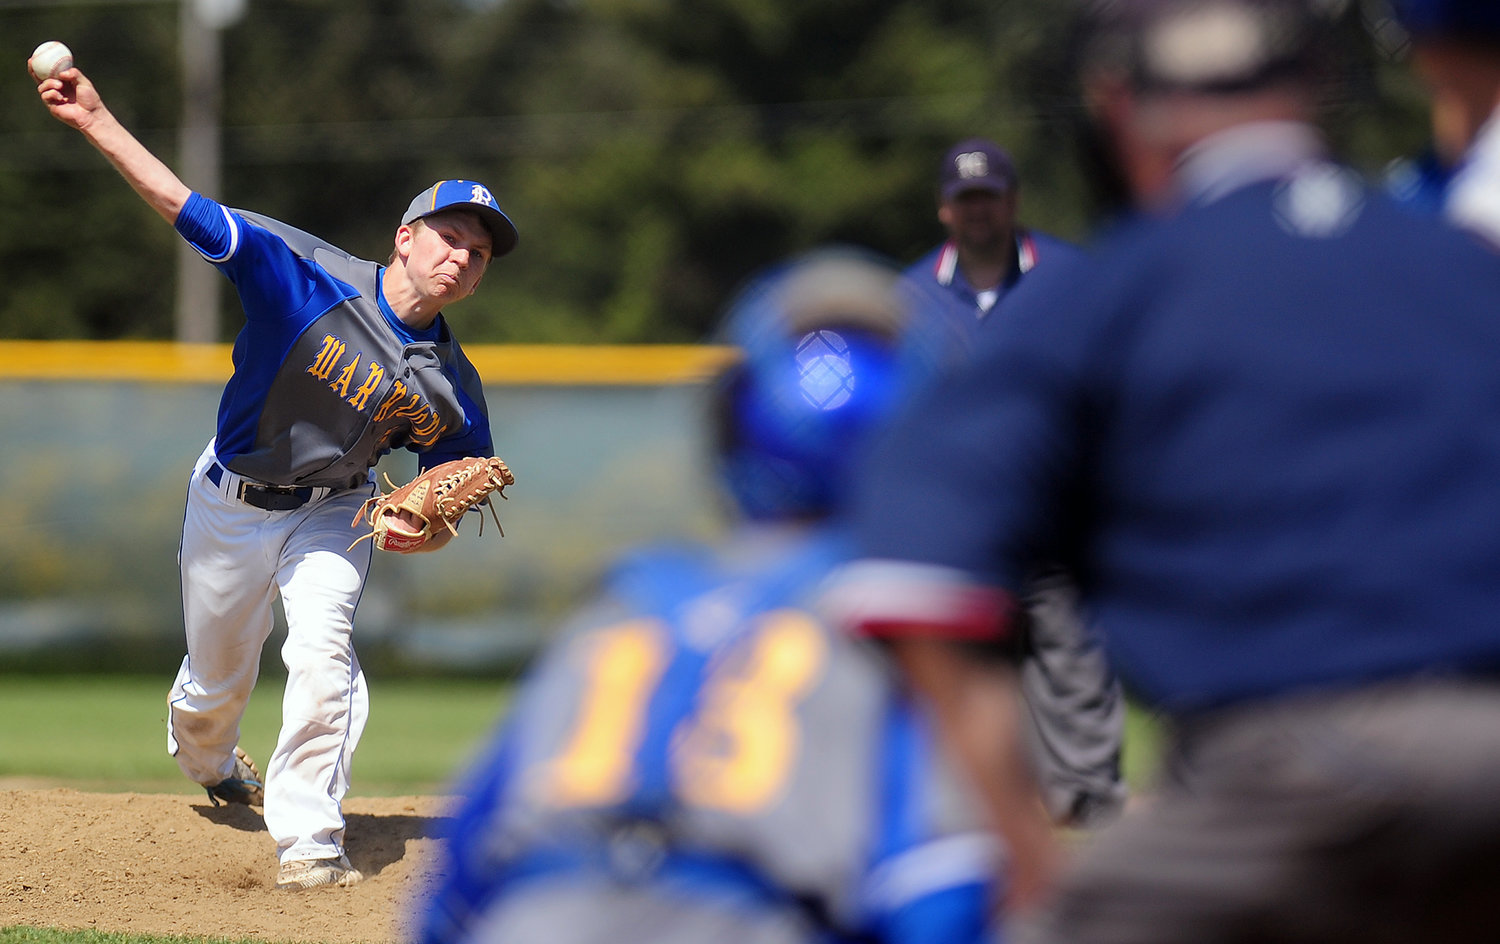 In this photo taken, Tuesday, May 13, Rochester High School senior Dylan Fosnacht delivers a pitch to a La Center batter during the 13th inning of a District IV 1A Baseball Tournament first-round game at Rochester High School in Rochester, Wash. Fosnacht threw 194 pitches in 14 innings of work and was pulled by head coach Jerry Striegel after the first two La Center batters reached base in the top of the 15th inning. "We talked to him every inning, and he said he felt comfortable, he felt good, and he's a little competitor," Striegel said. "He didn't want to come out of the ballgame. He wasn't very pleased when I took him out in the 15th." Rochester won the game 1-0 on a squeeze bunt in the bottom of the 17th inning.